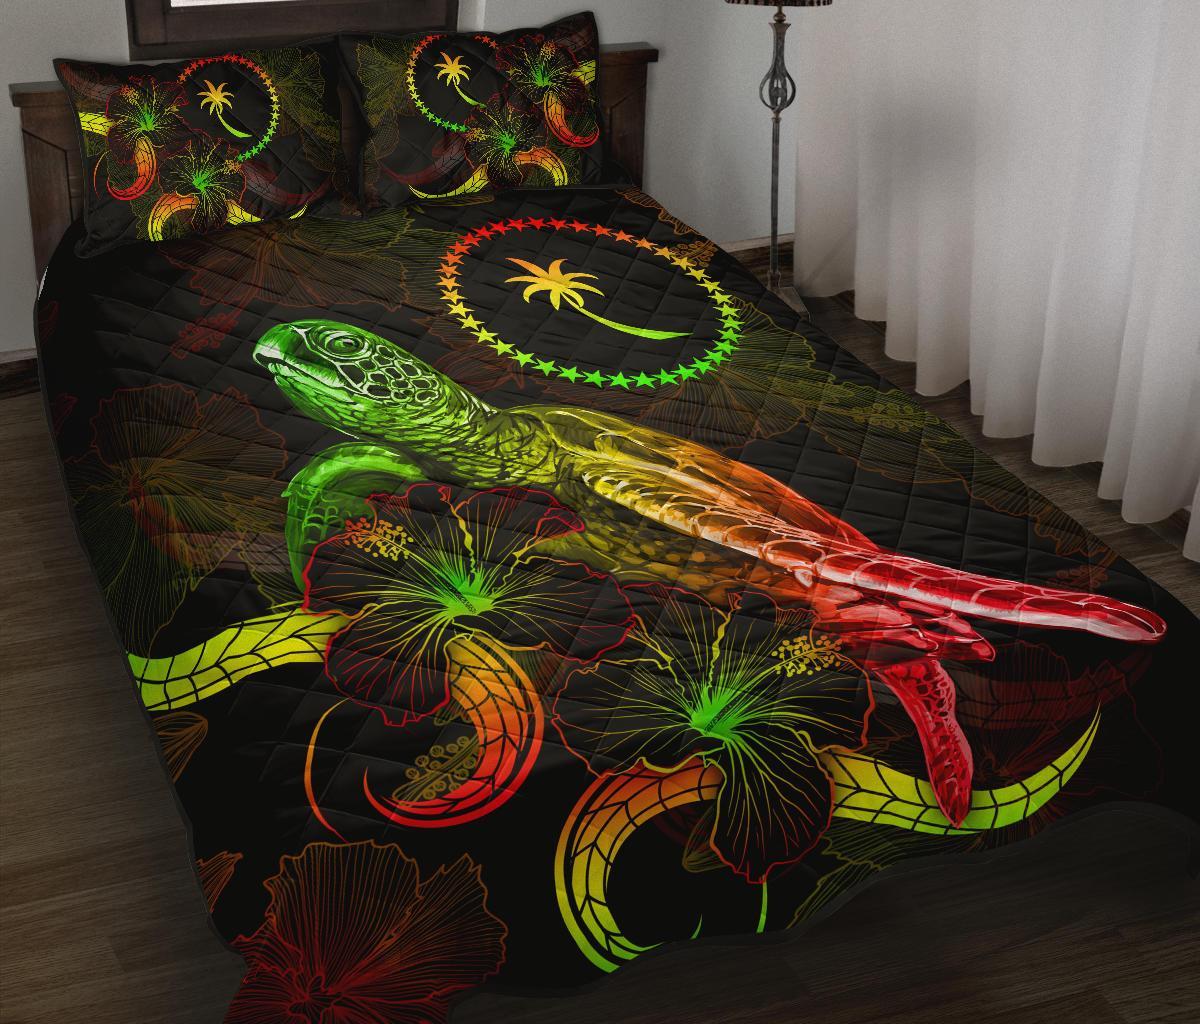 Chuuk Polynesian Quilt Bed Set - Turtle With Blooming Hibiscus Reggae Art - Polynesian Pride